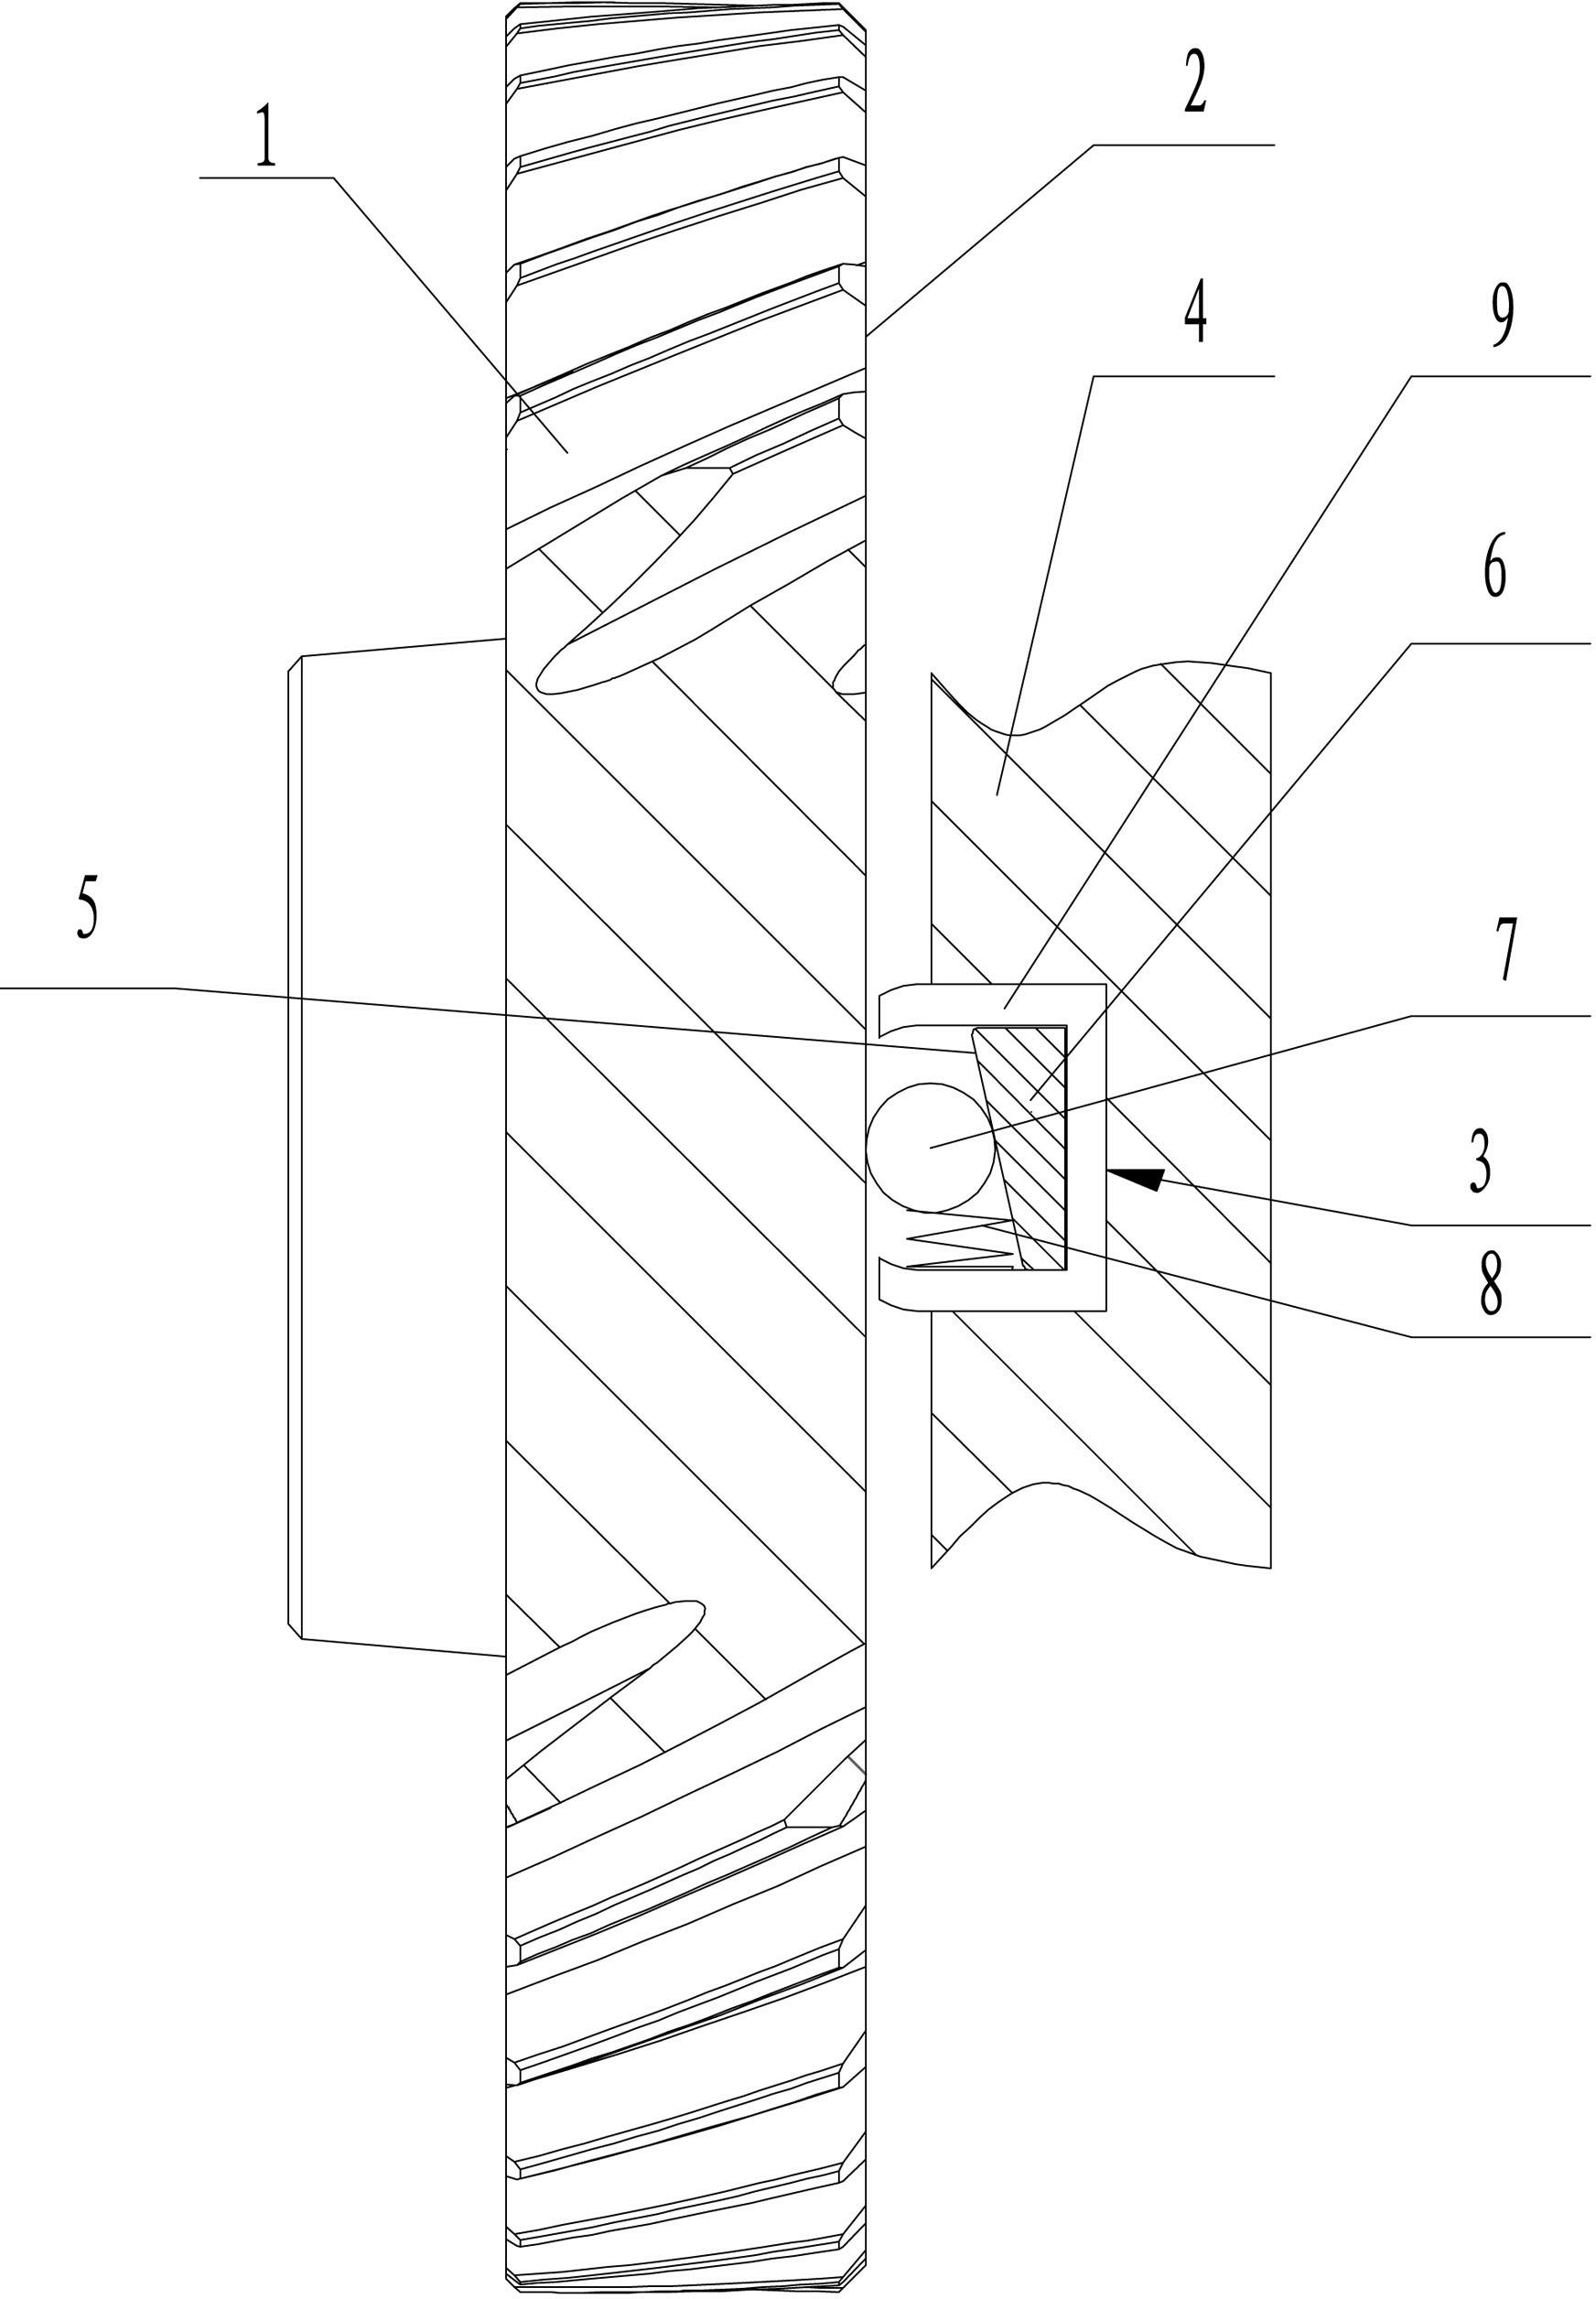 Vibration reduction device of rotating elements